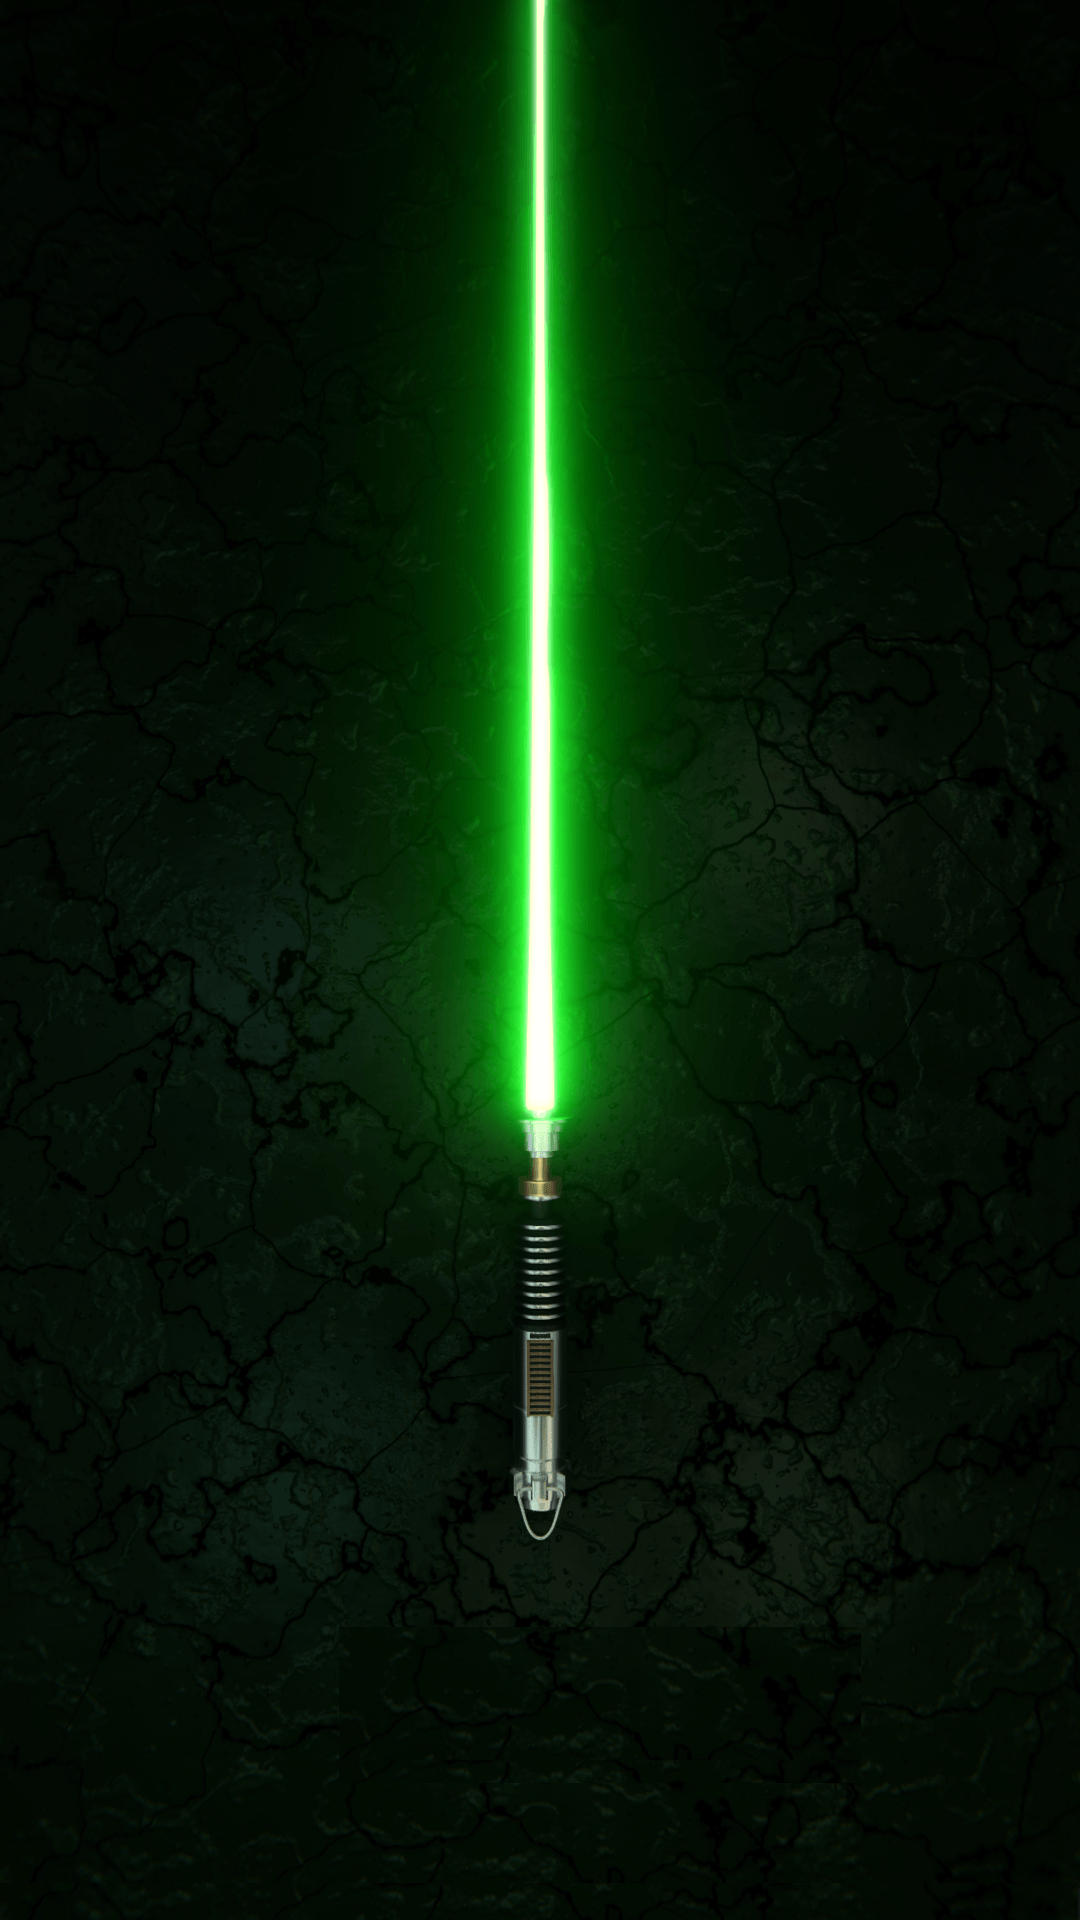 Star Wars Lightsaber to see more exciting Star Wars wallpaper!. Star wars wallpaper, Star wars light saber, Star wars background